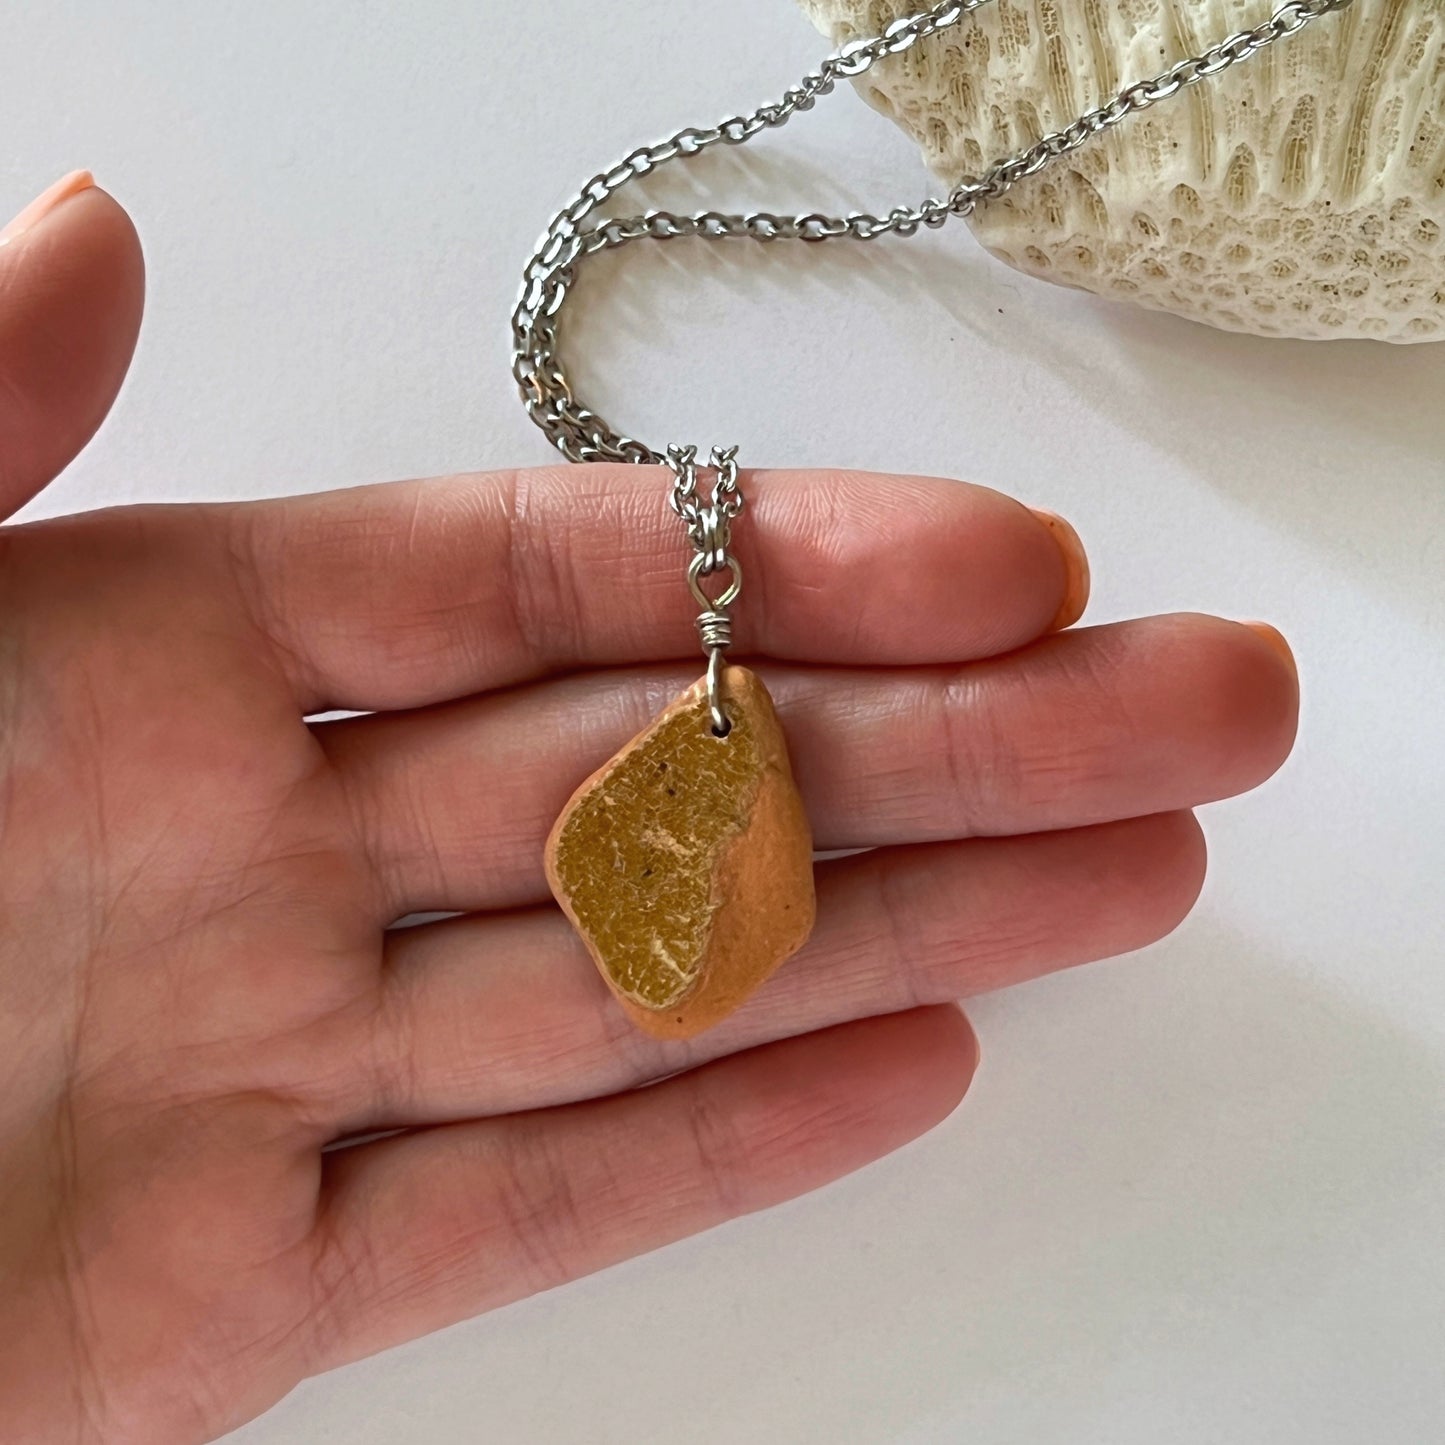 Mermaid Sea Pottery Necklace (Portugal)